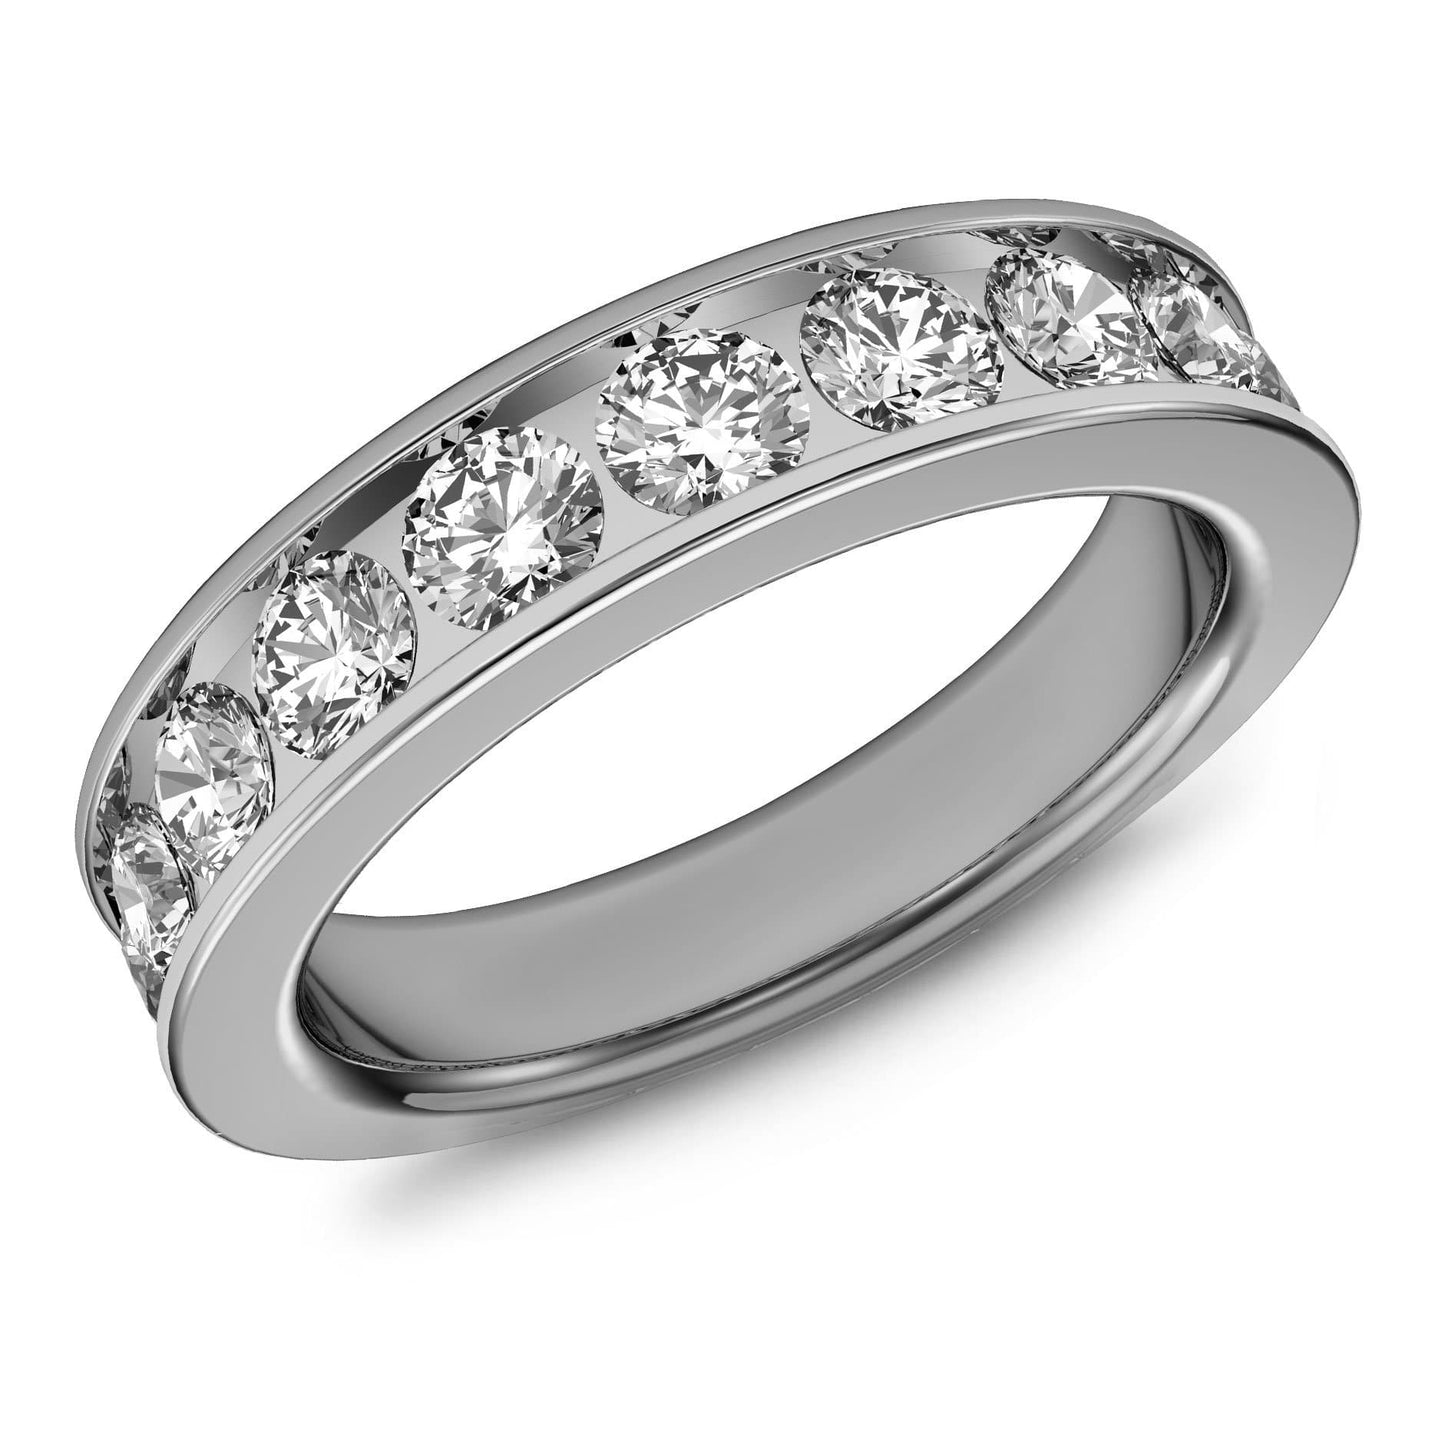 1.5ct Channel Set Round Cut Diamond Ring in 14k Gold